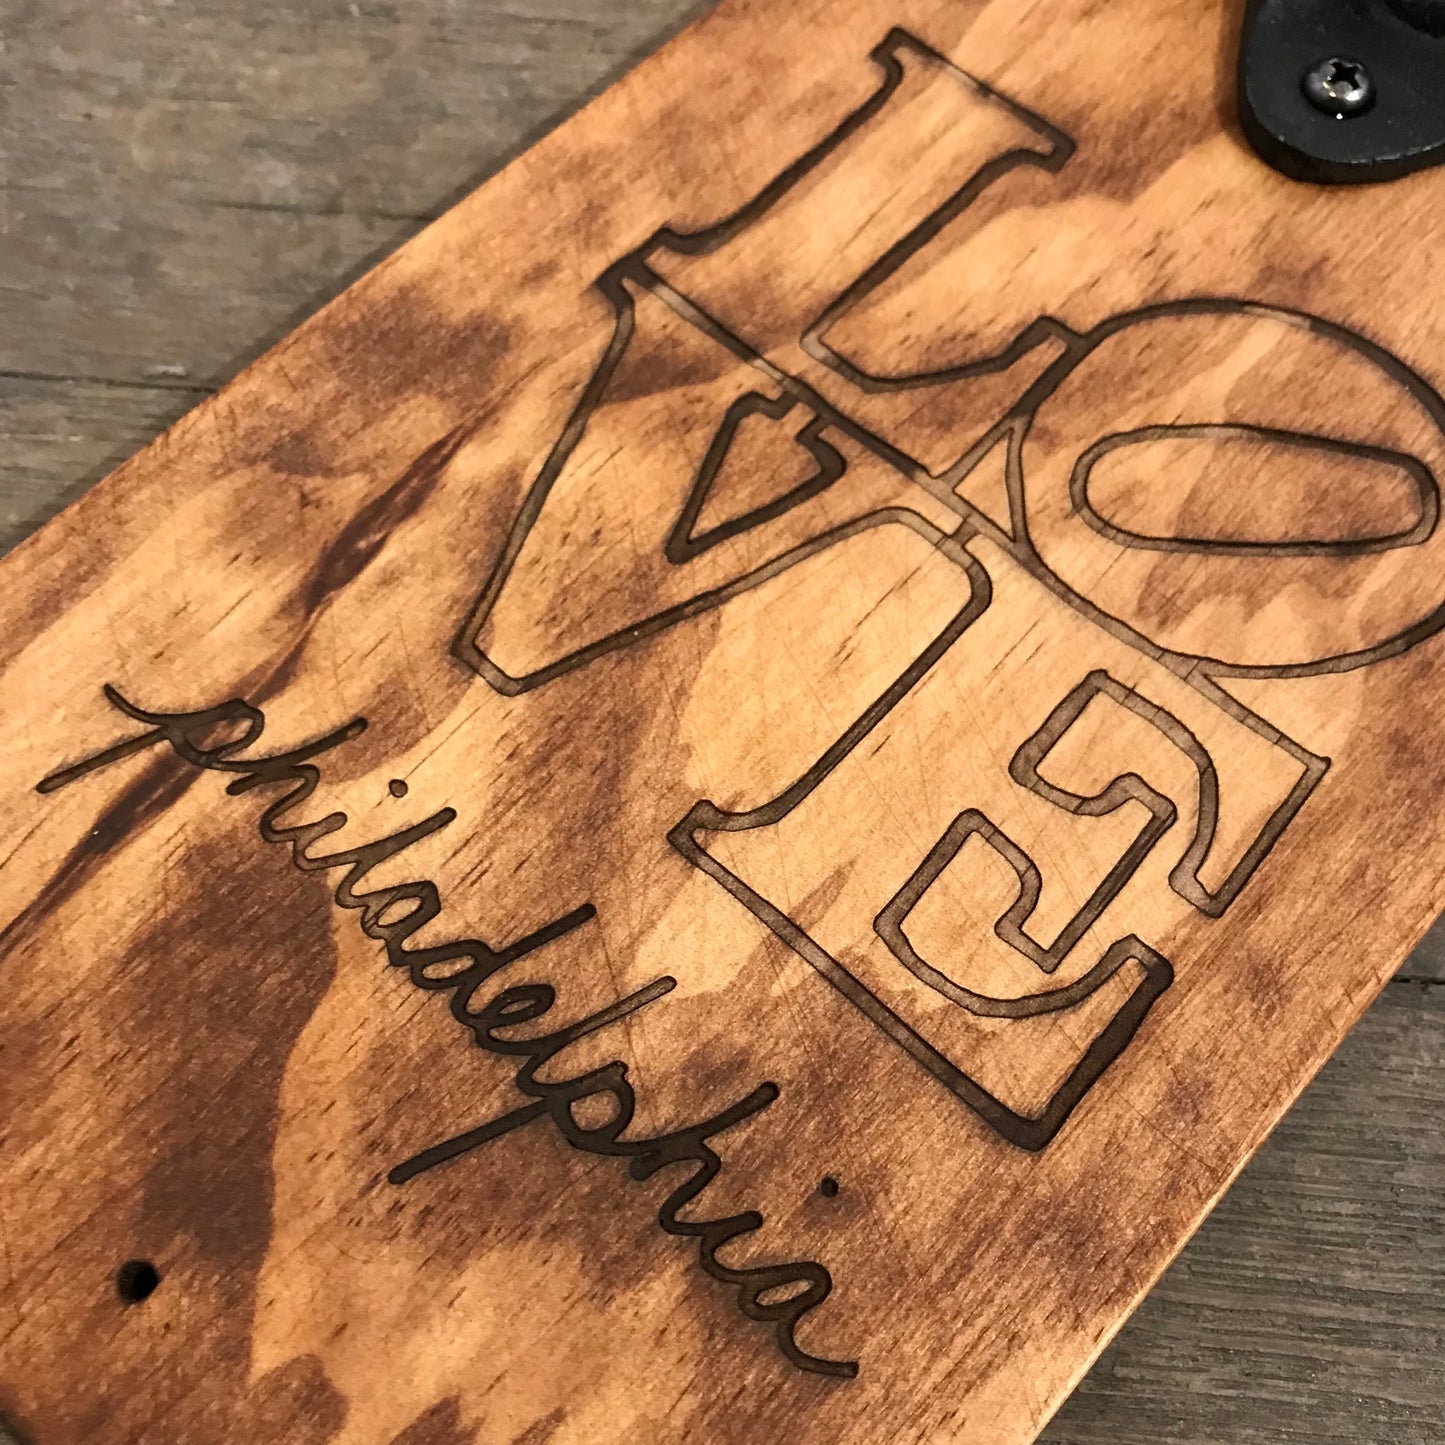 Wooden plaque with the word "love" and "Philadelphia" laser-etched, featuring iconic "love" sculpture design by Philly Phlights.